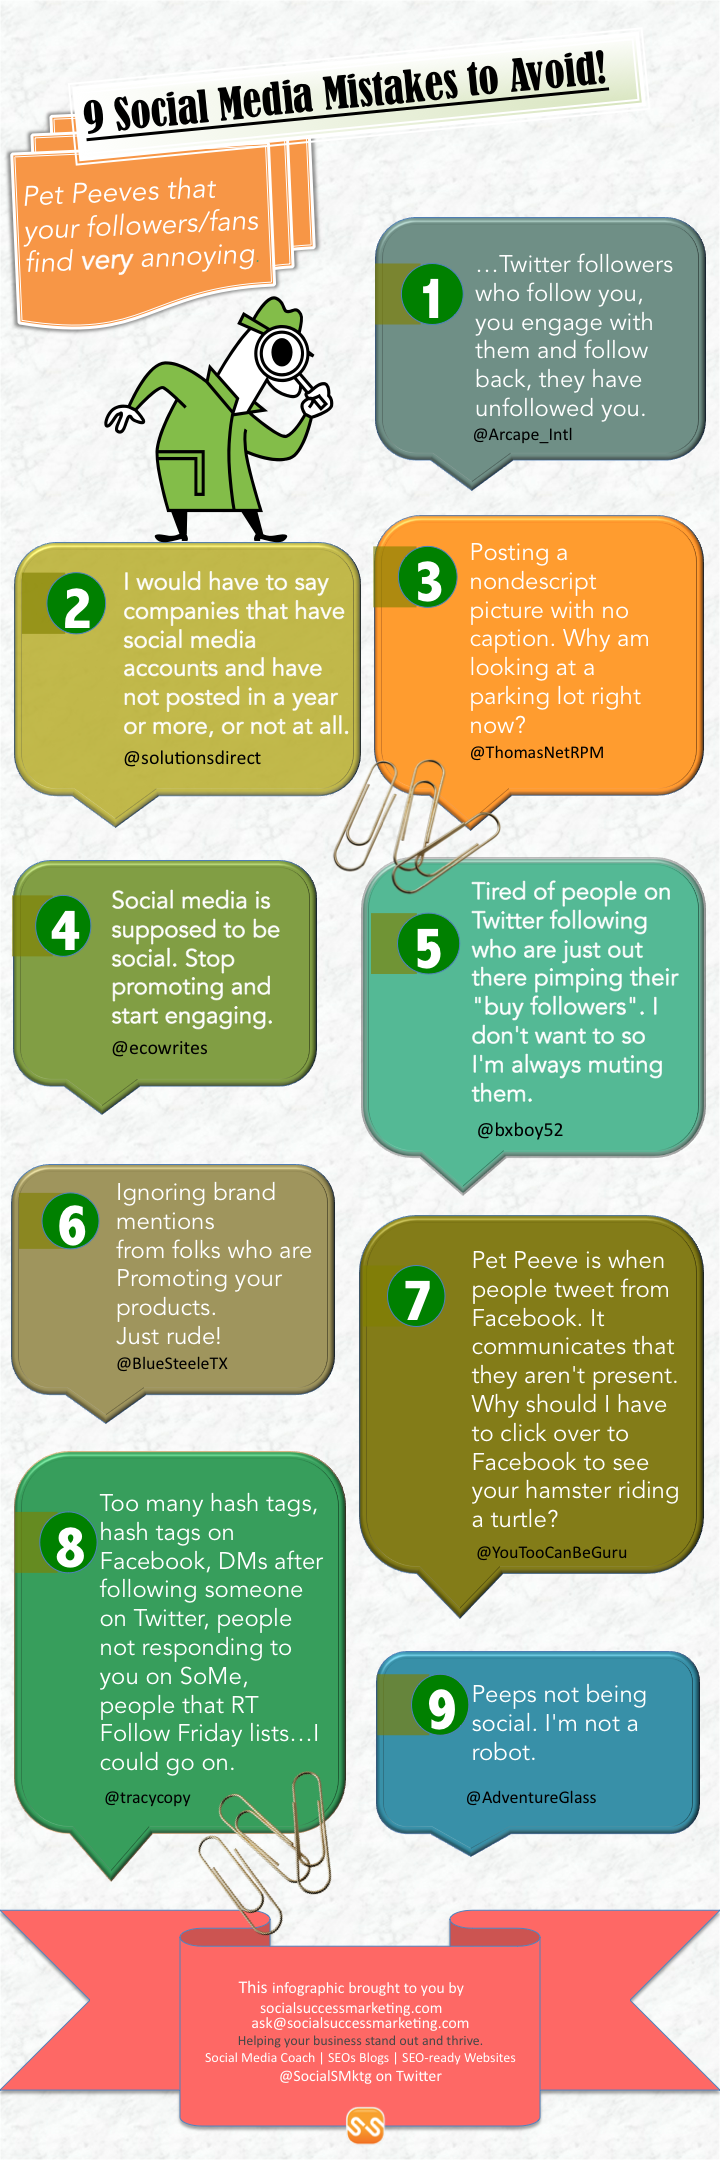 9 Social Media Fails To Avoid According To Businesses [Infographic] image social media fails.png